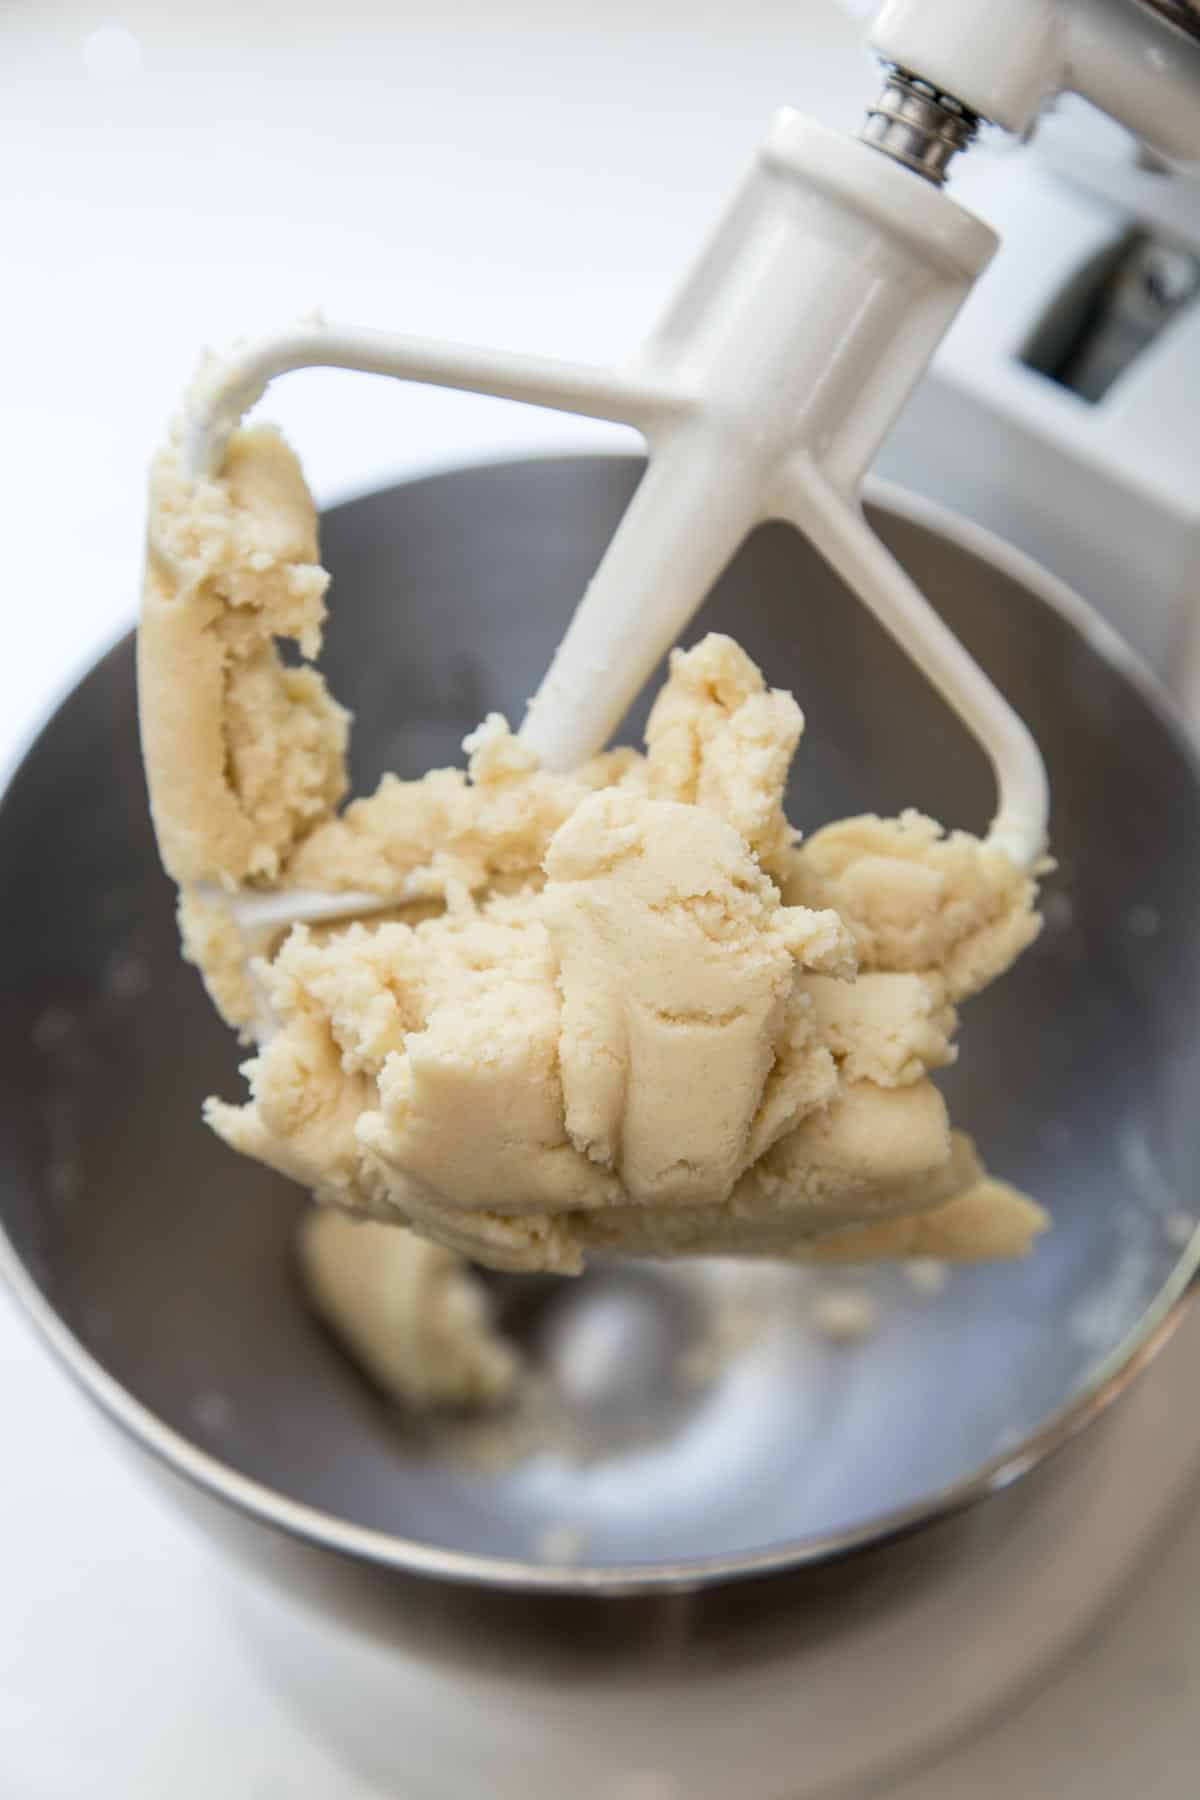 Shortbread cookie dough mixed in a stand mixer.